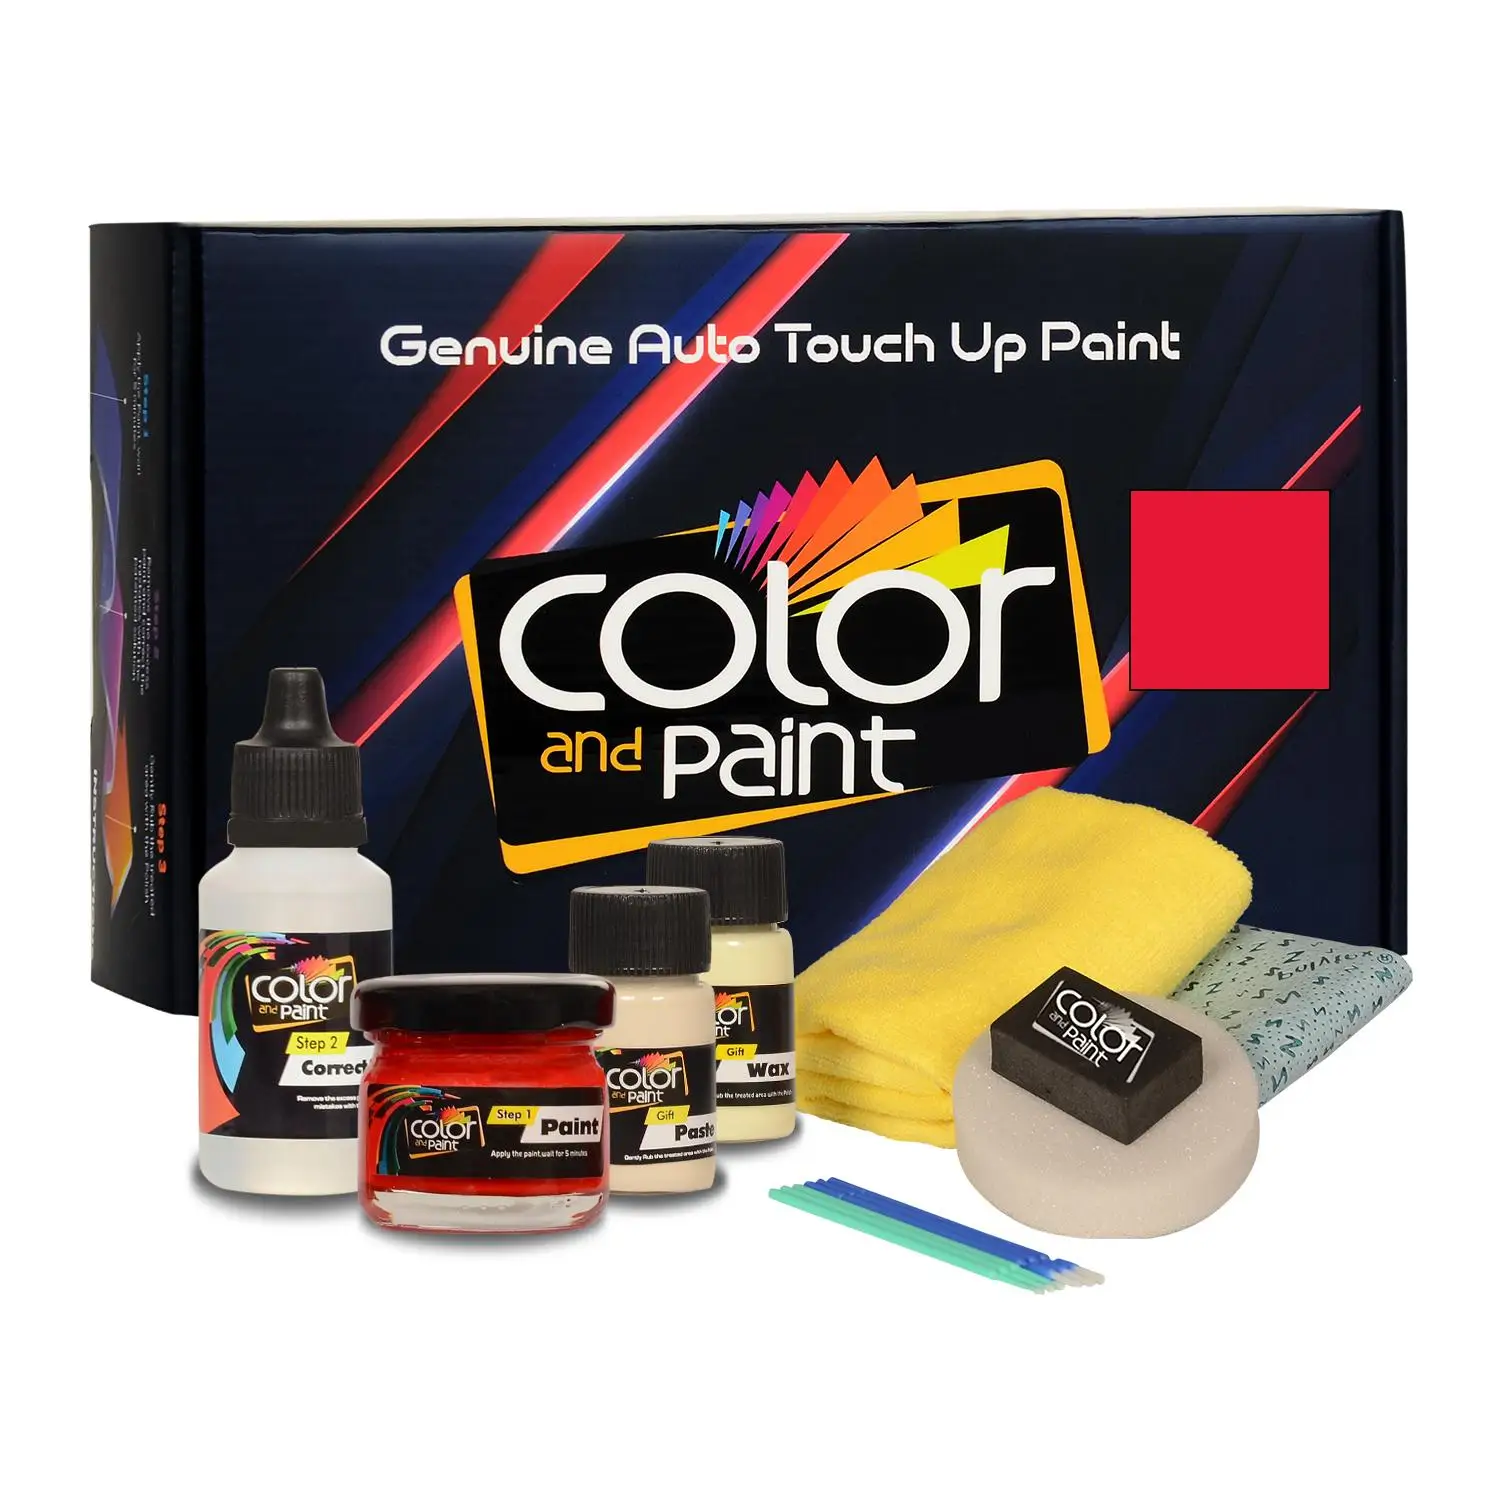 

Color and Paint compatible with American Motors Automotive Touch Up Paint - GARNET - 83 P11 - Basic Care